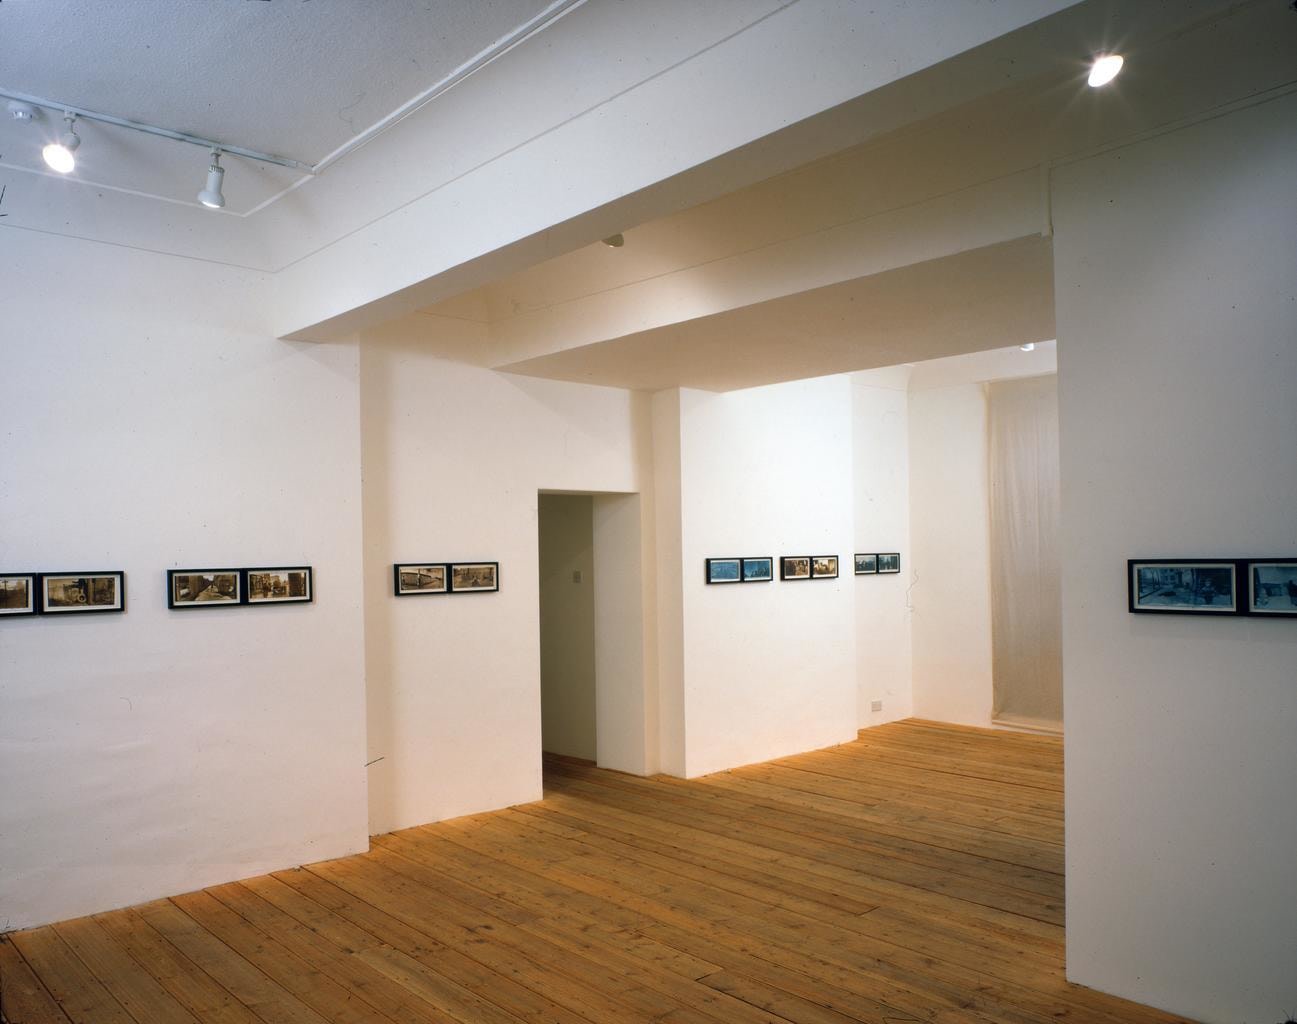  Installation view, Boris Mikhailov: &#039;By the Ground&#039; and &#039;At Dusk&#039;. &nbsp;London Projects, London, March 7 - April 12, 1997